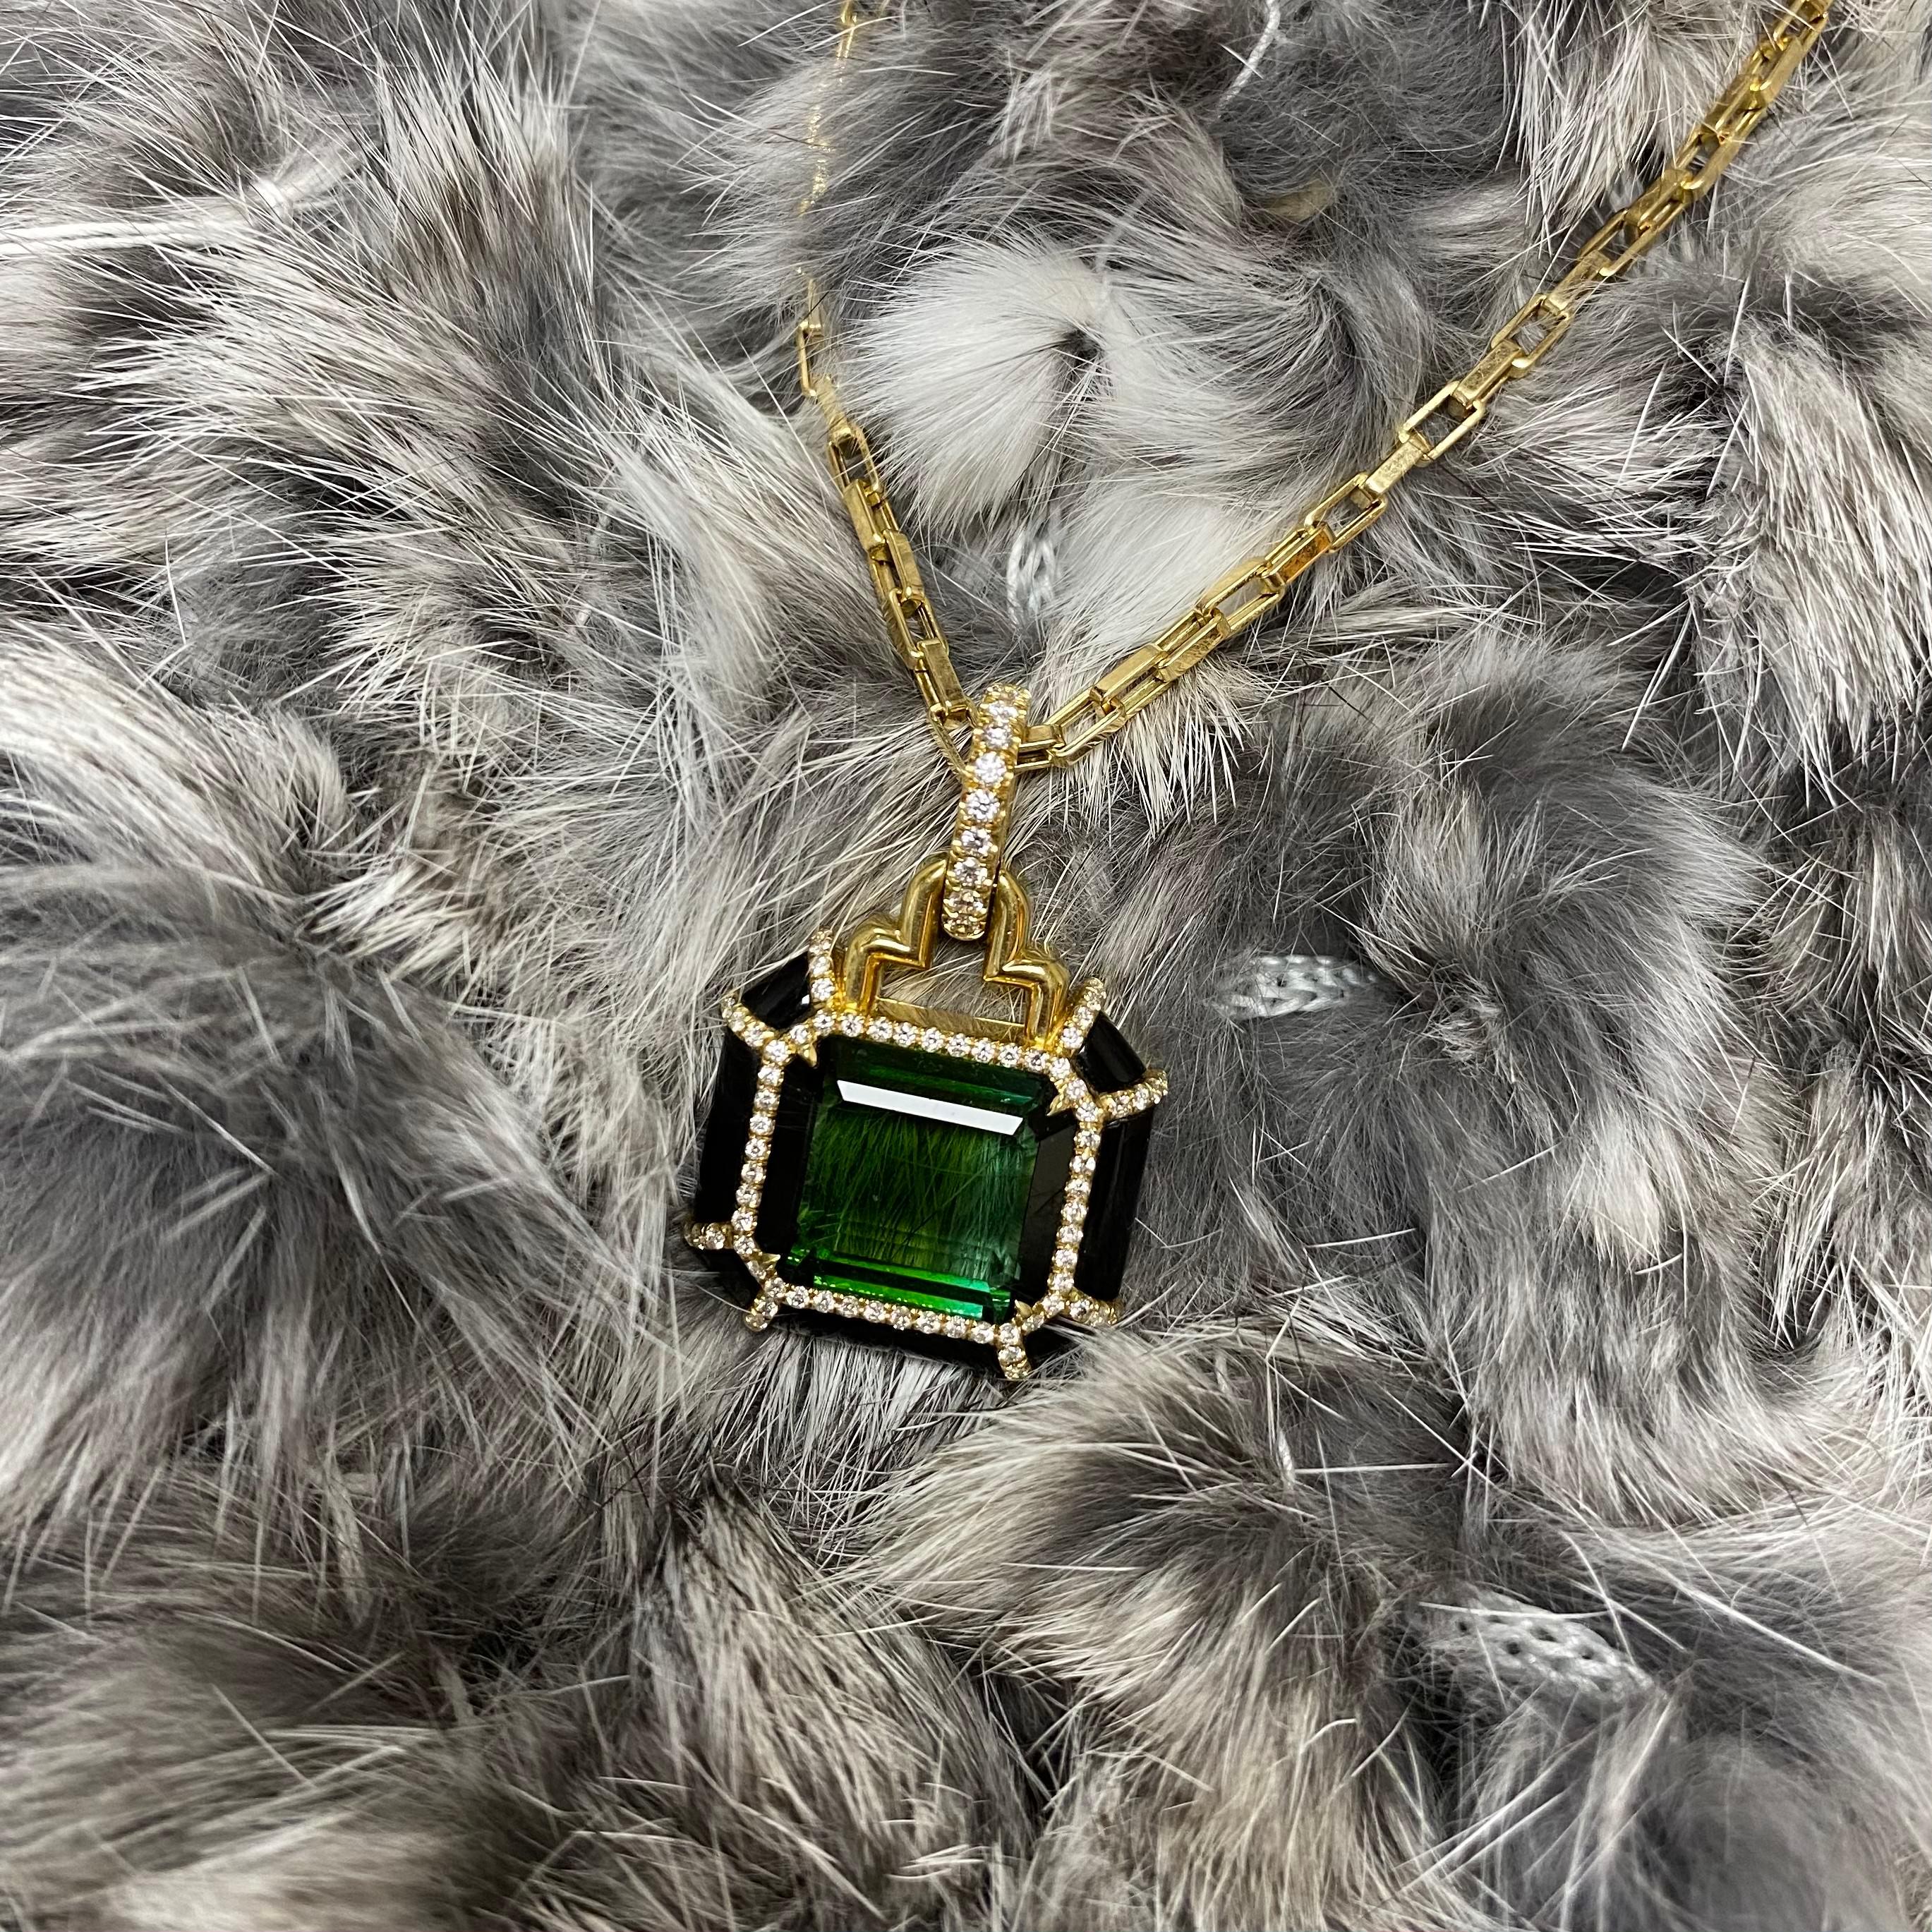 This Green Tourmaline Emerald Cut Pendant in 18K Yellow Gold with Diamonds is a stunning piece of jewelry from the 'G-One' Collection. It features a large, emerald-cut green tourmaline stone set in a high-quality 18K yellow gold pendant. The